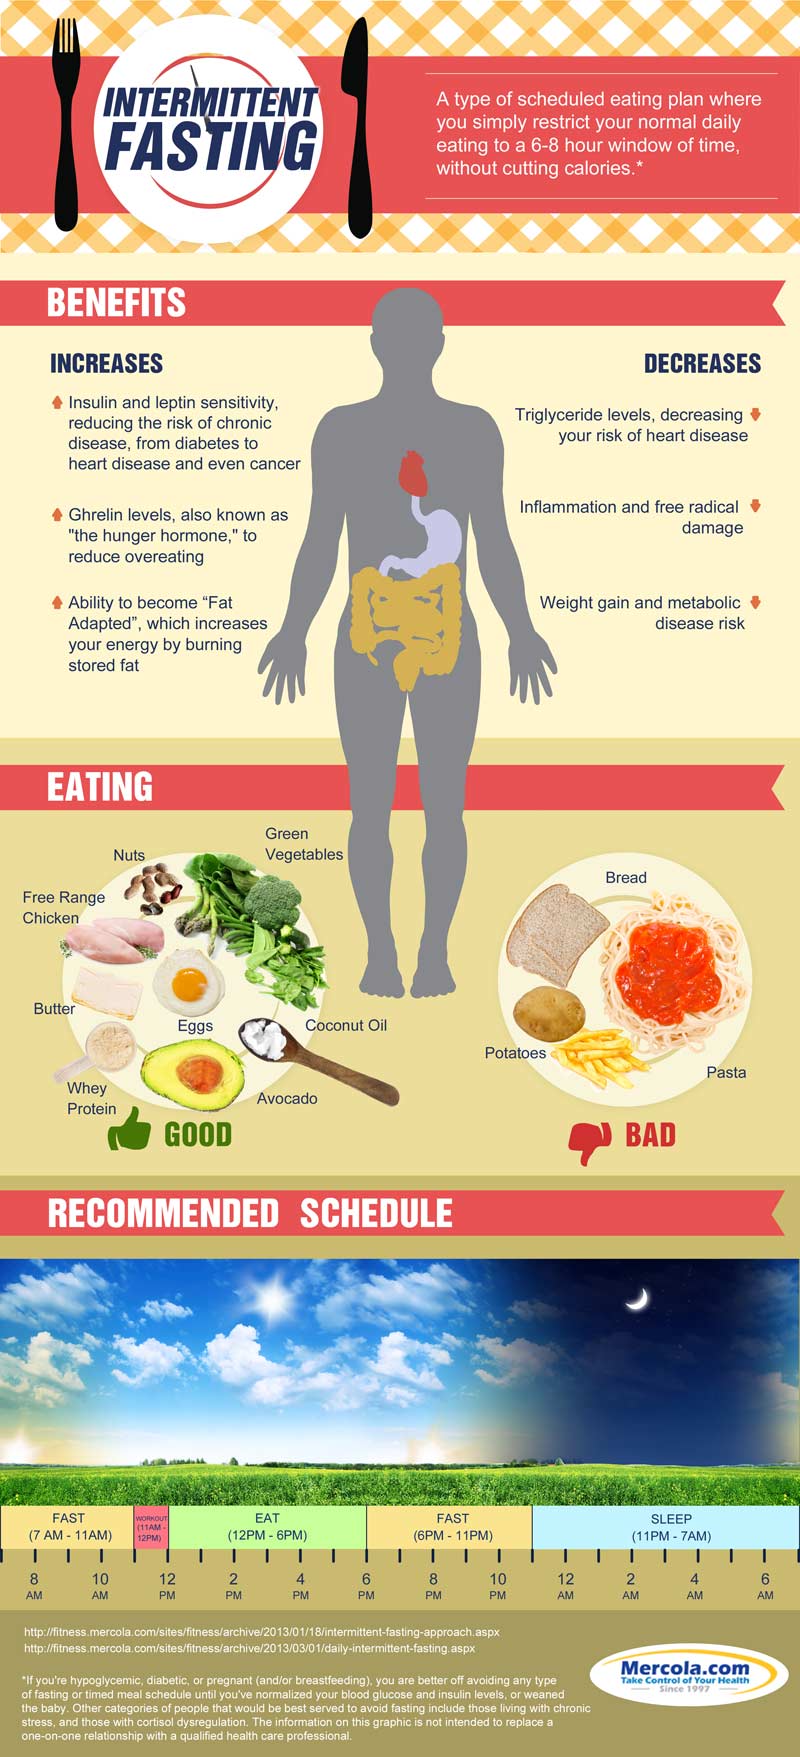 intermittent-fasting infographic the benefits